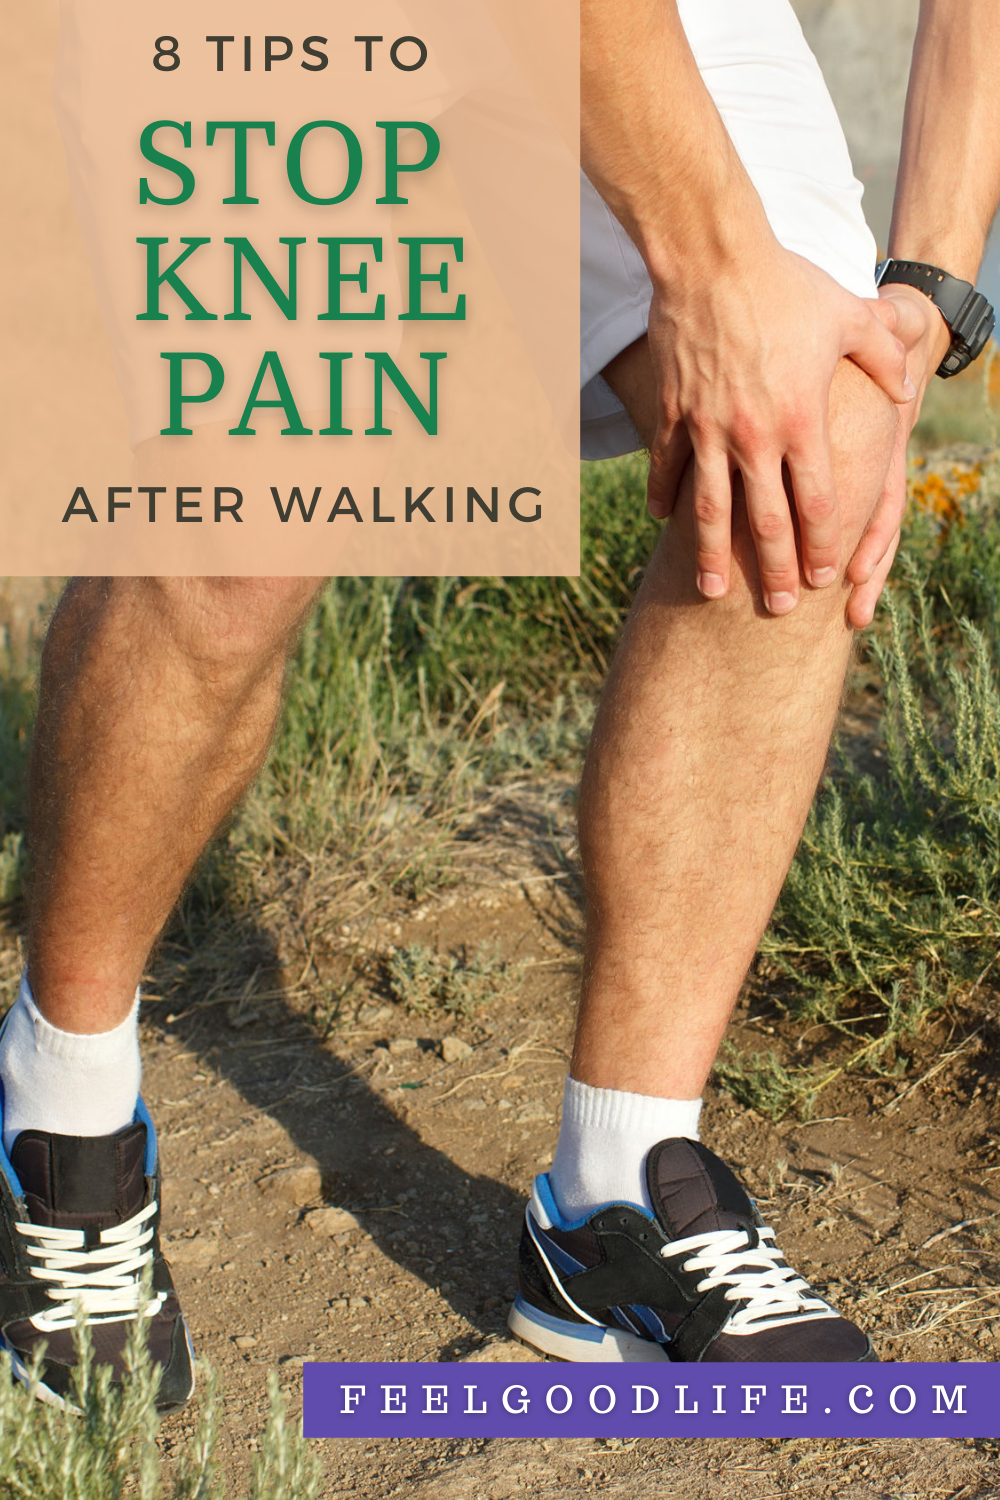 8 Tips to Stop Knee Pain After Walking